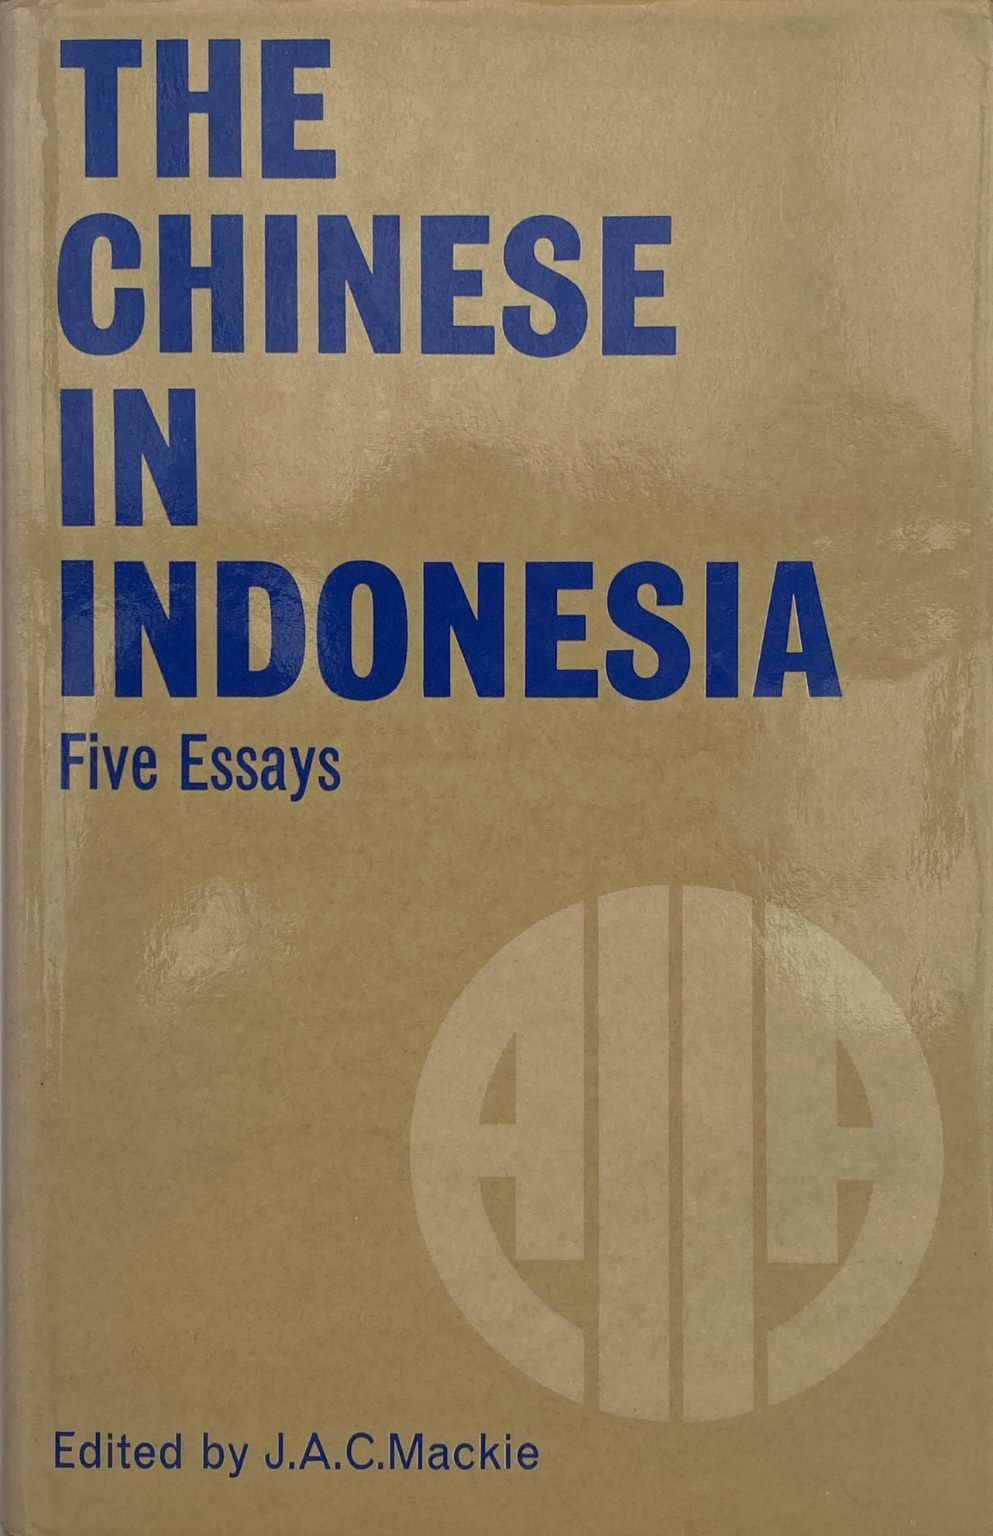 THE CHINESE IN INDONESIA: Five Essays